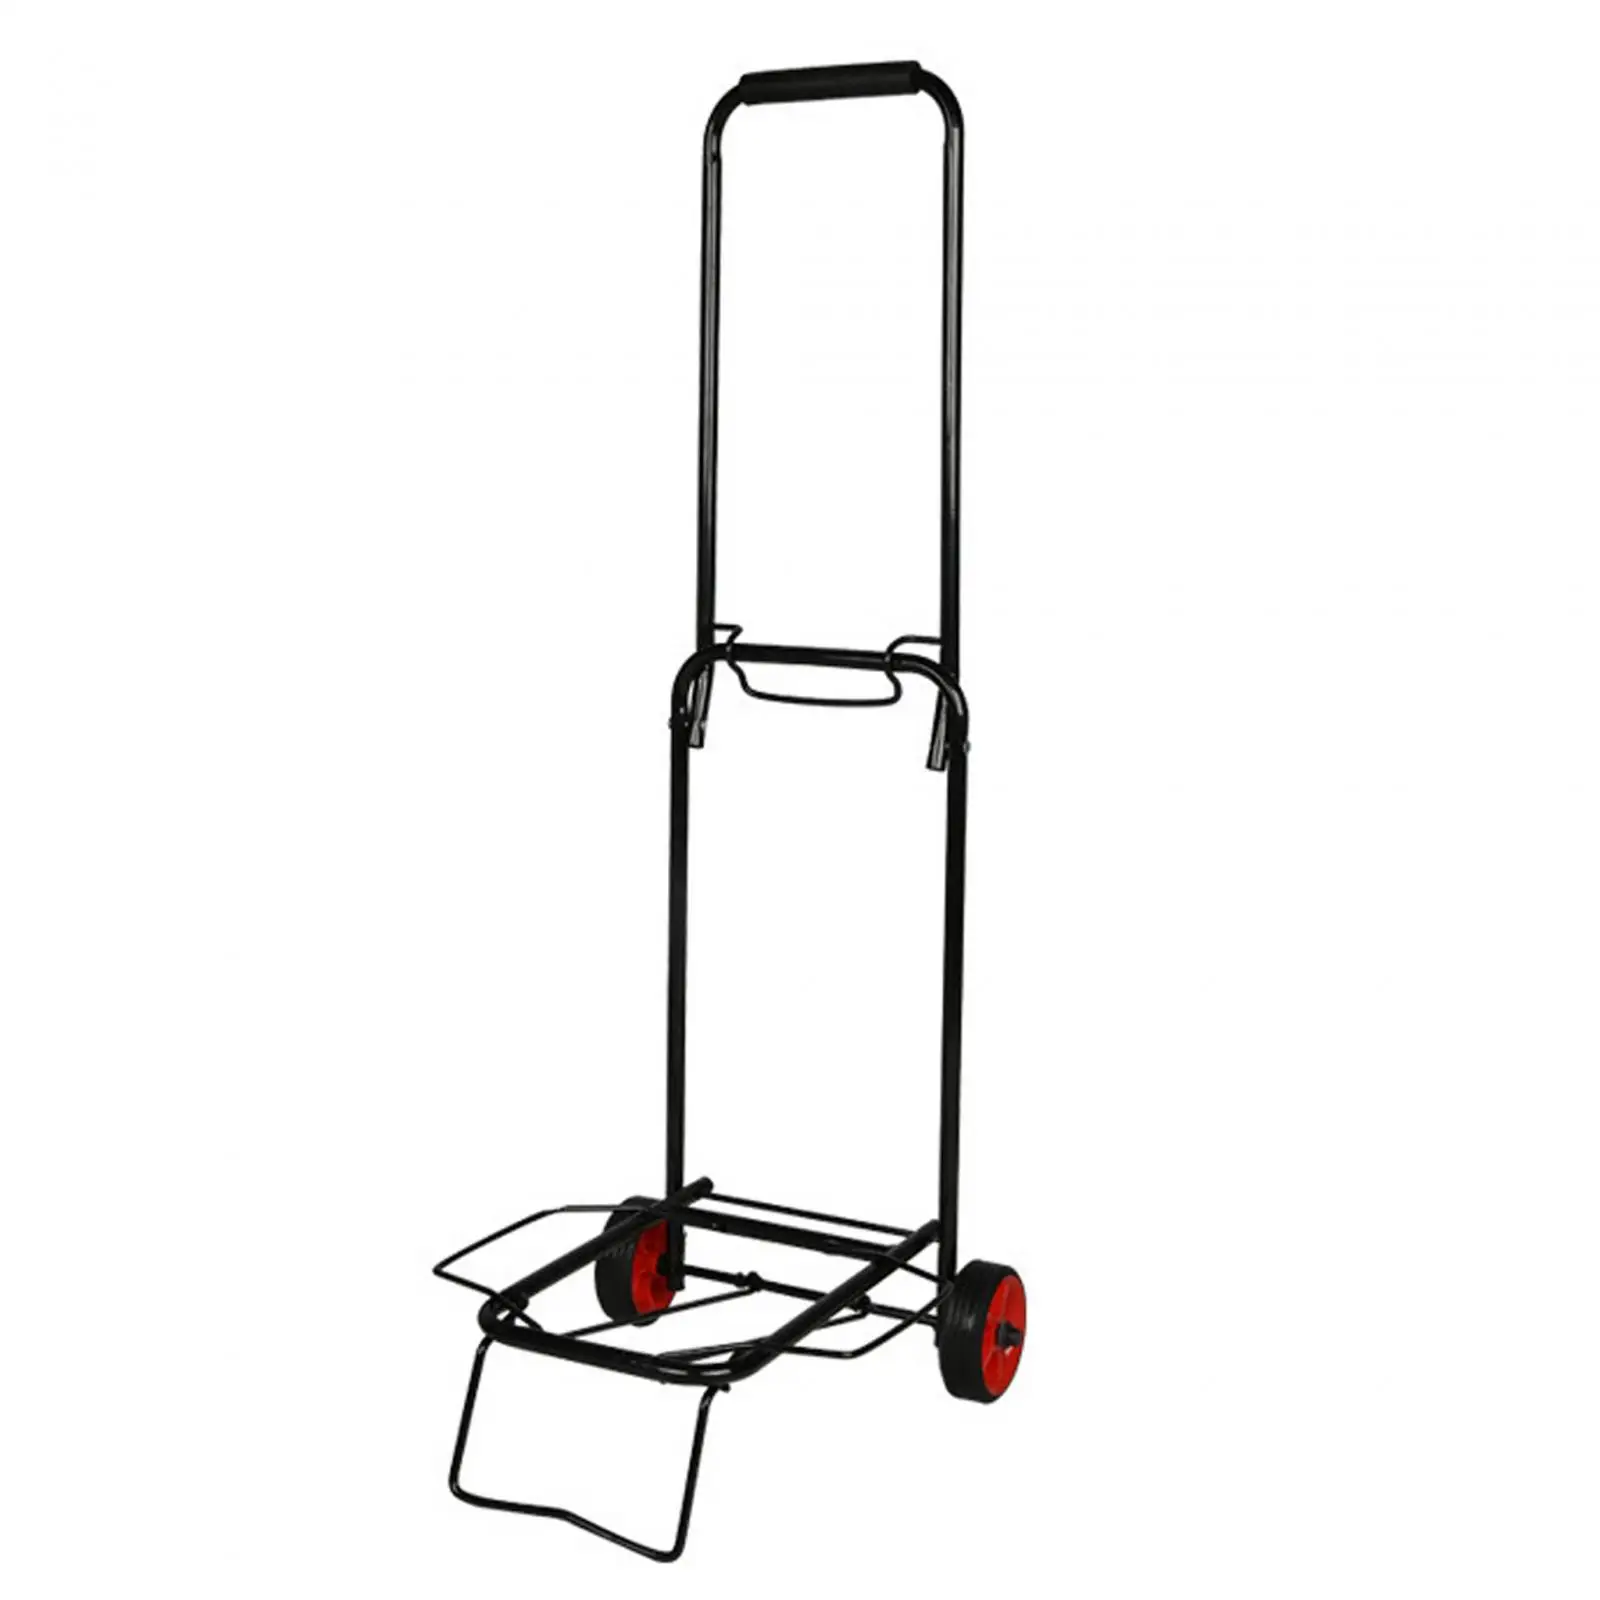 Folding Hand Truck Adjustable with 2 Wheels Metal Lightweight Foldable Hand Truck Hand Cart Utility Luggage Trolley for Office